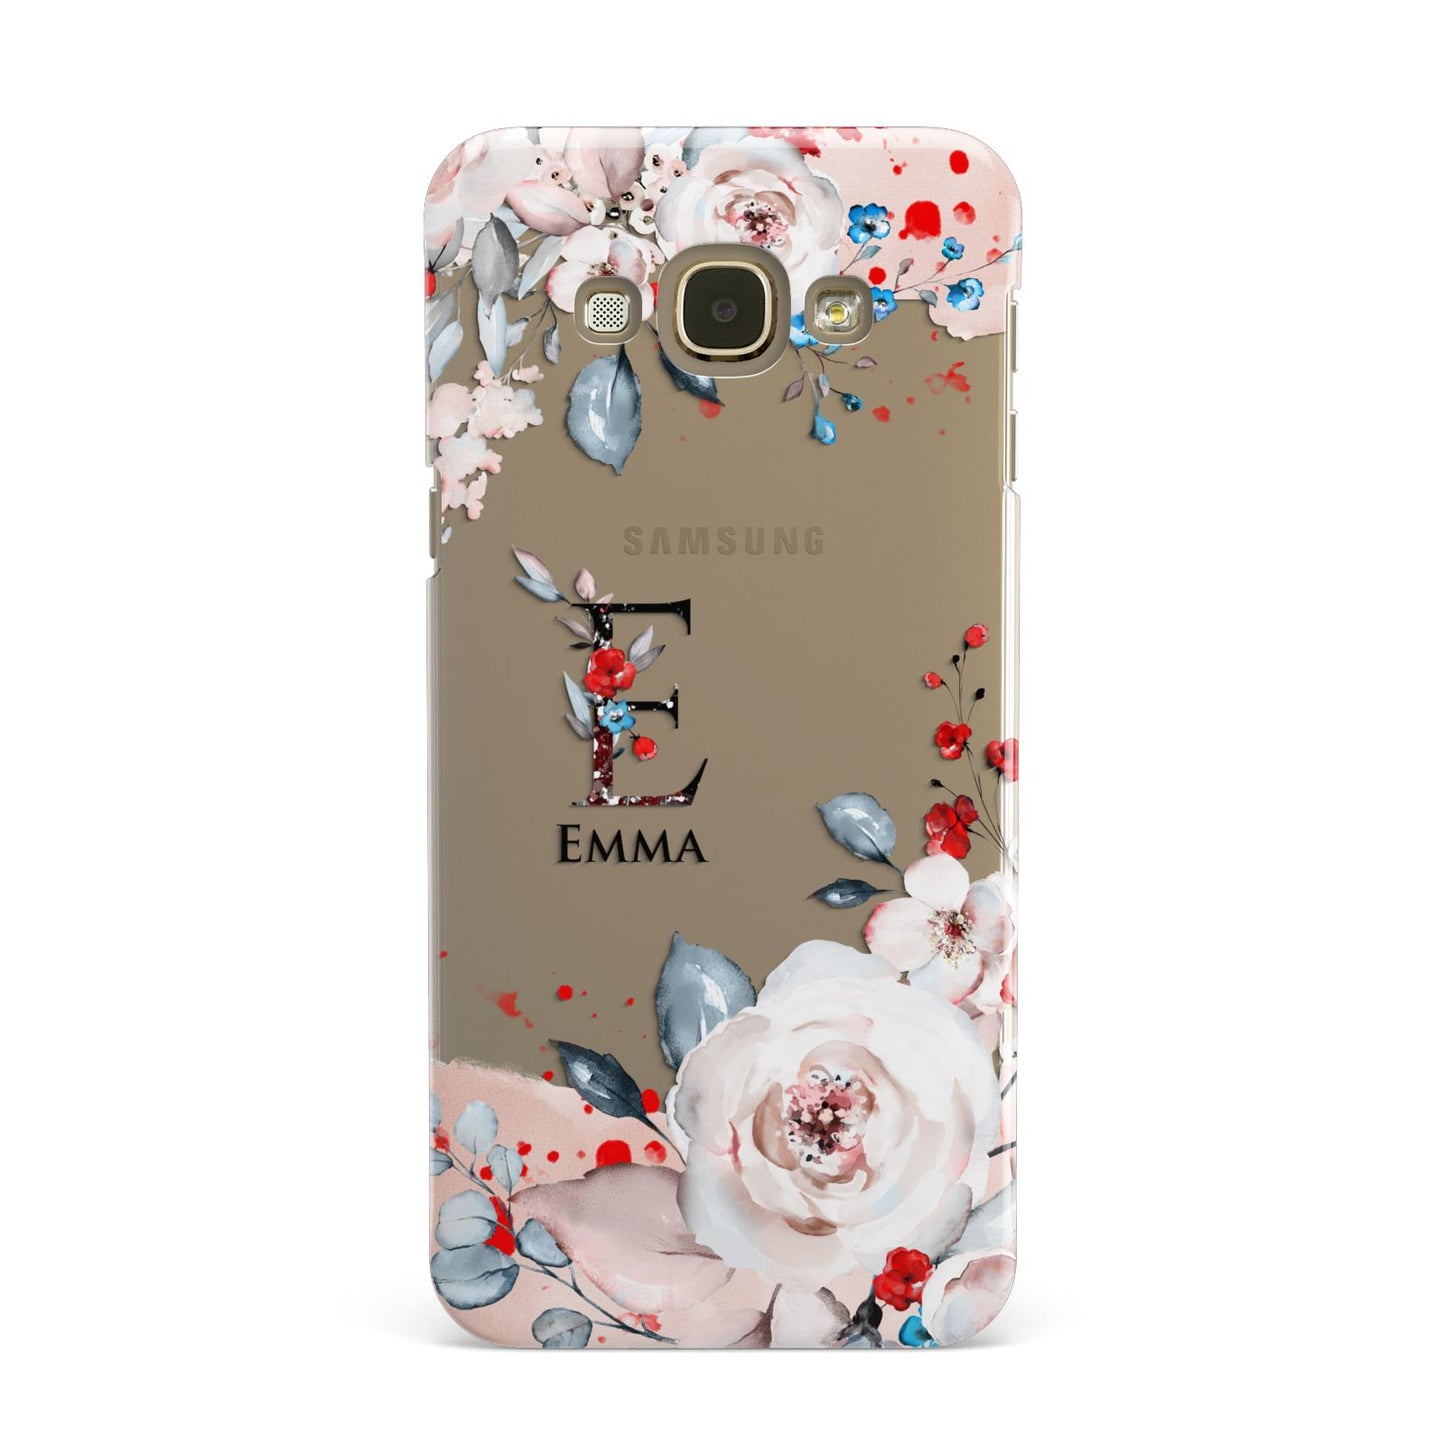 Monogrammed Roses Floral Wreath Samsung Galaxy A8 Case